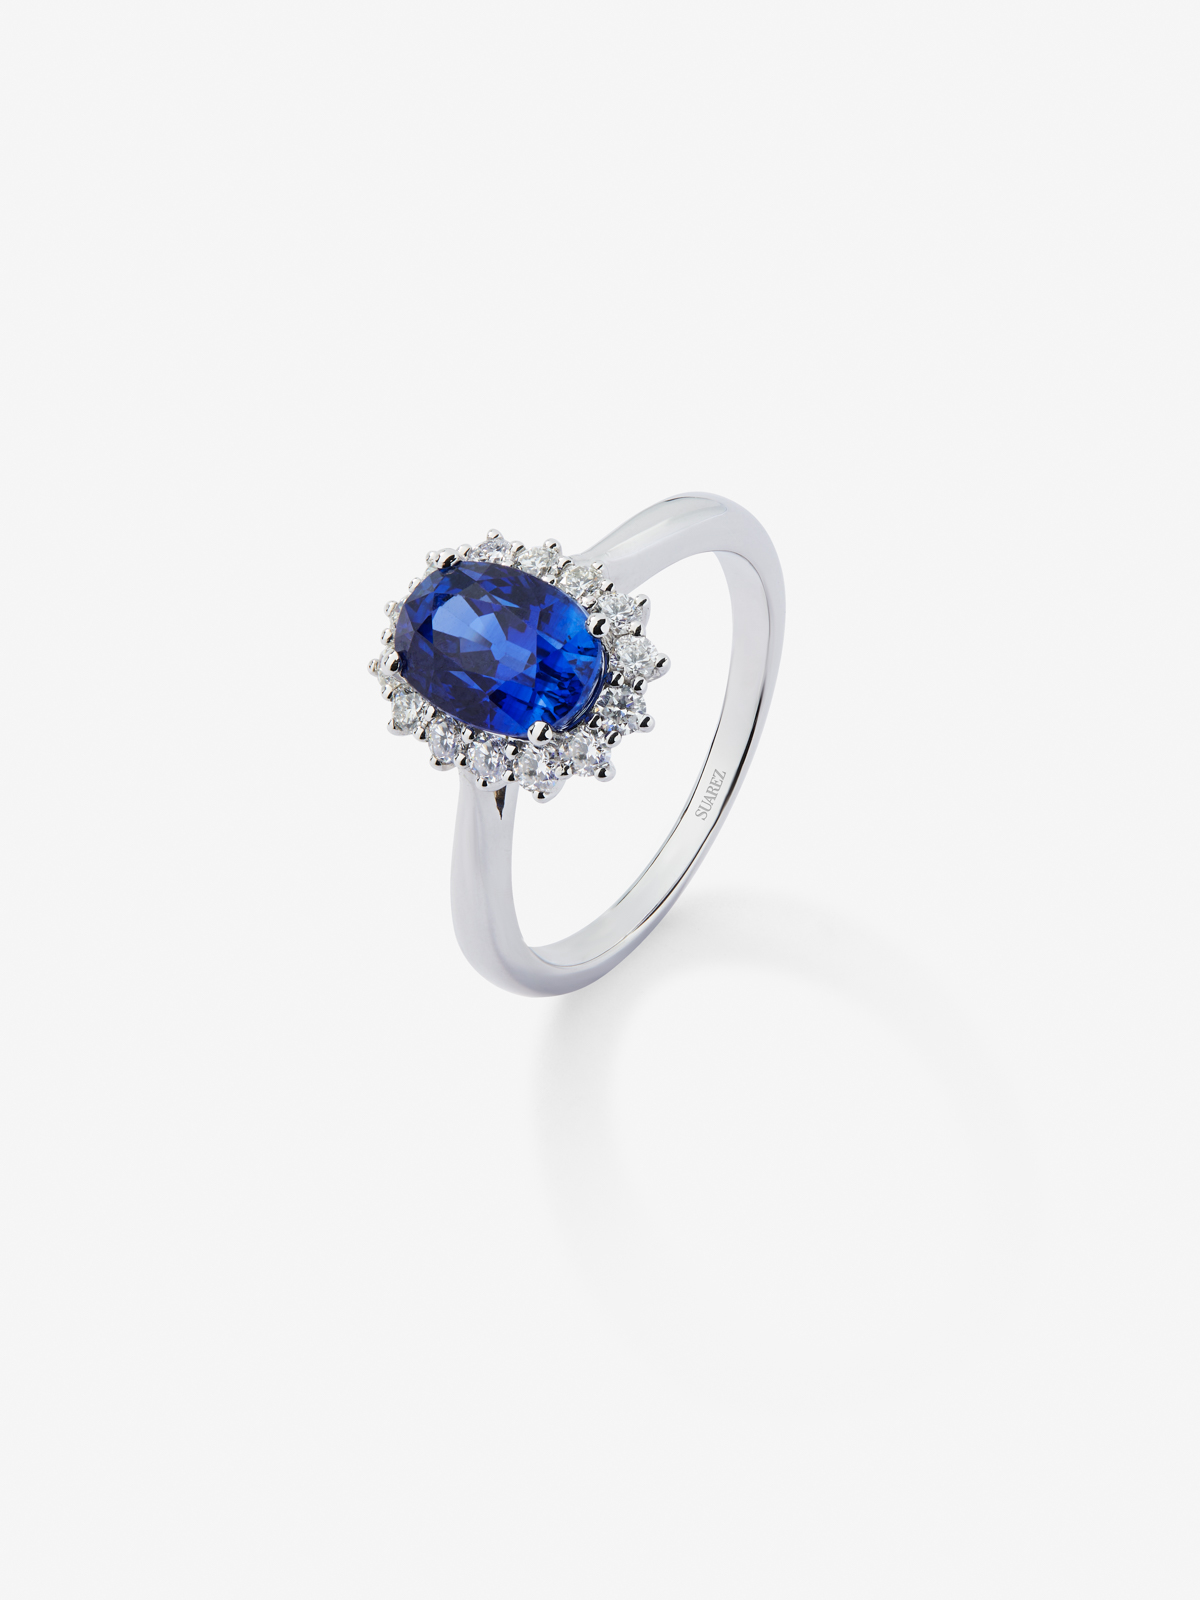 18K White Gold Ring with Royal Blue Zafiro in 2.38 cts oval size